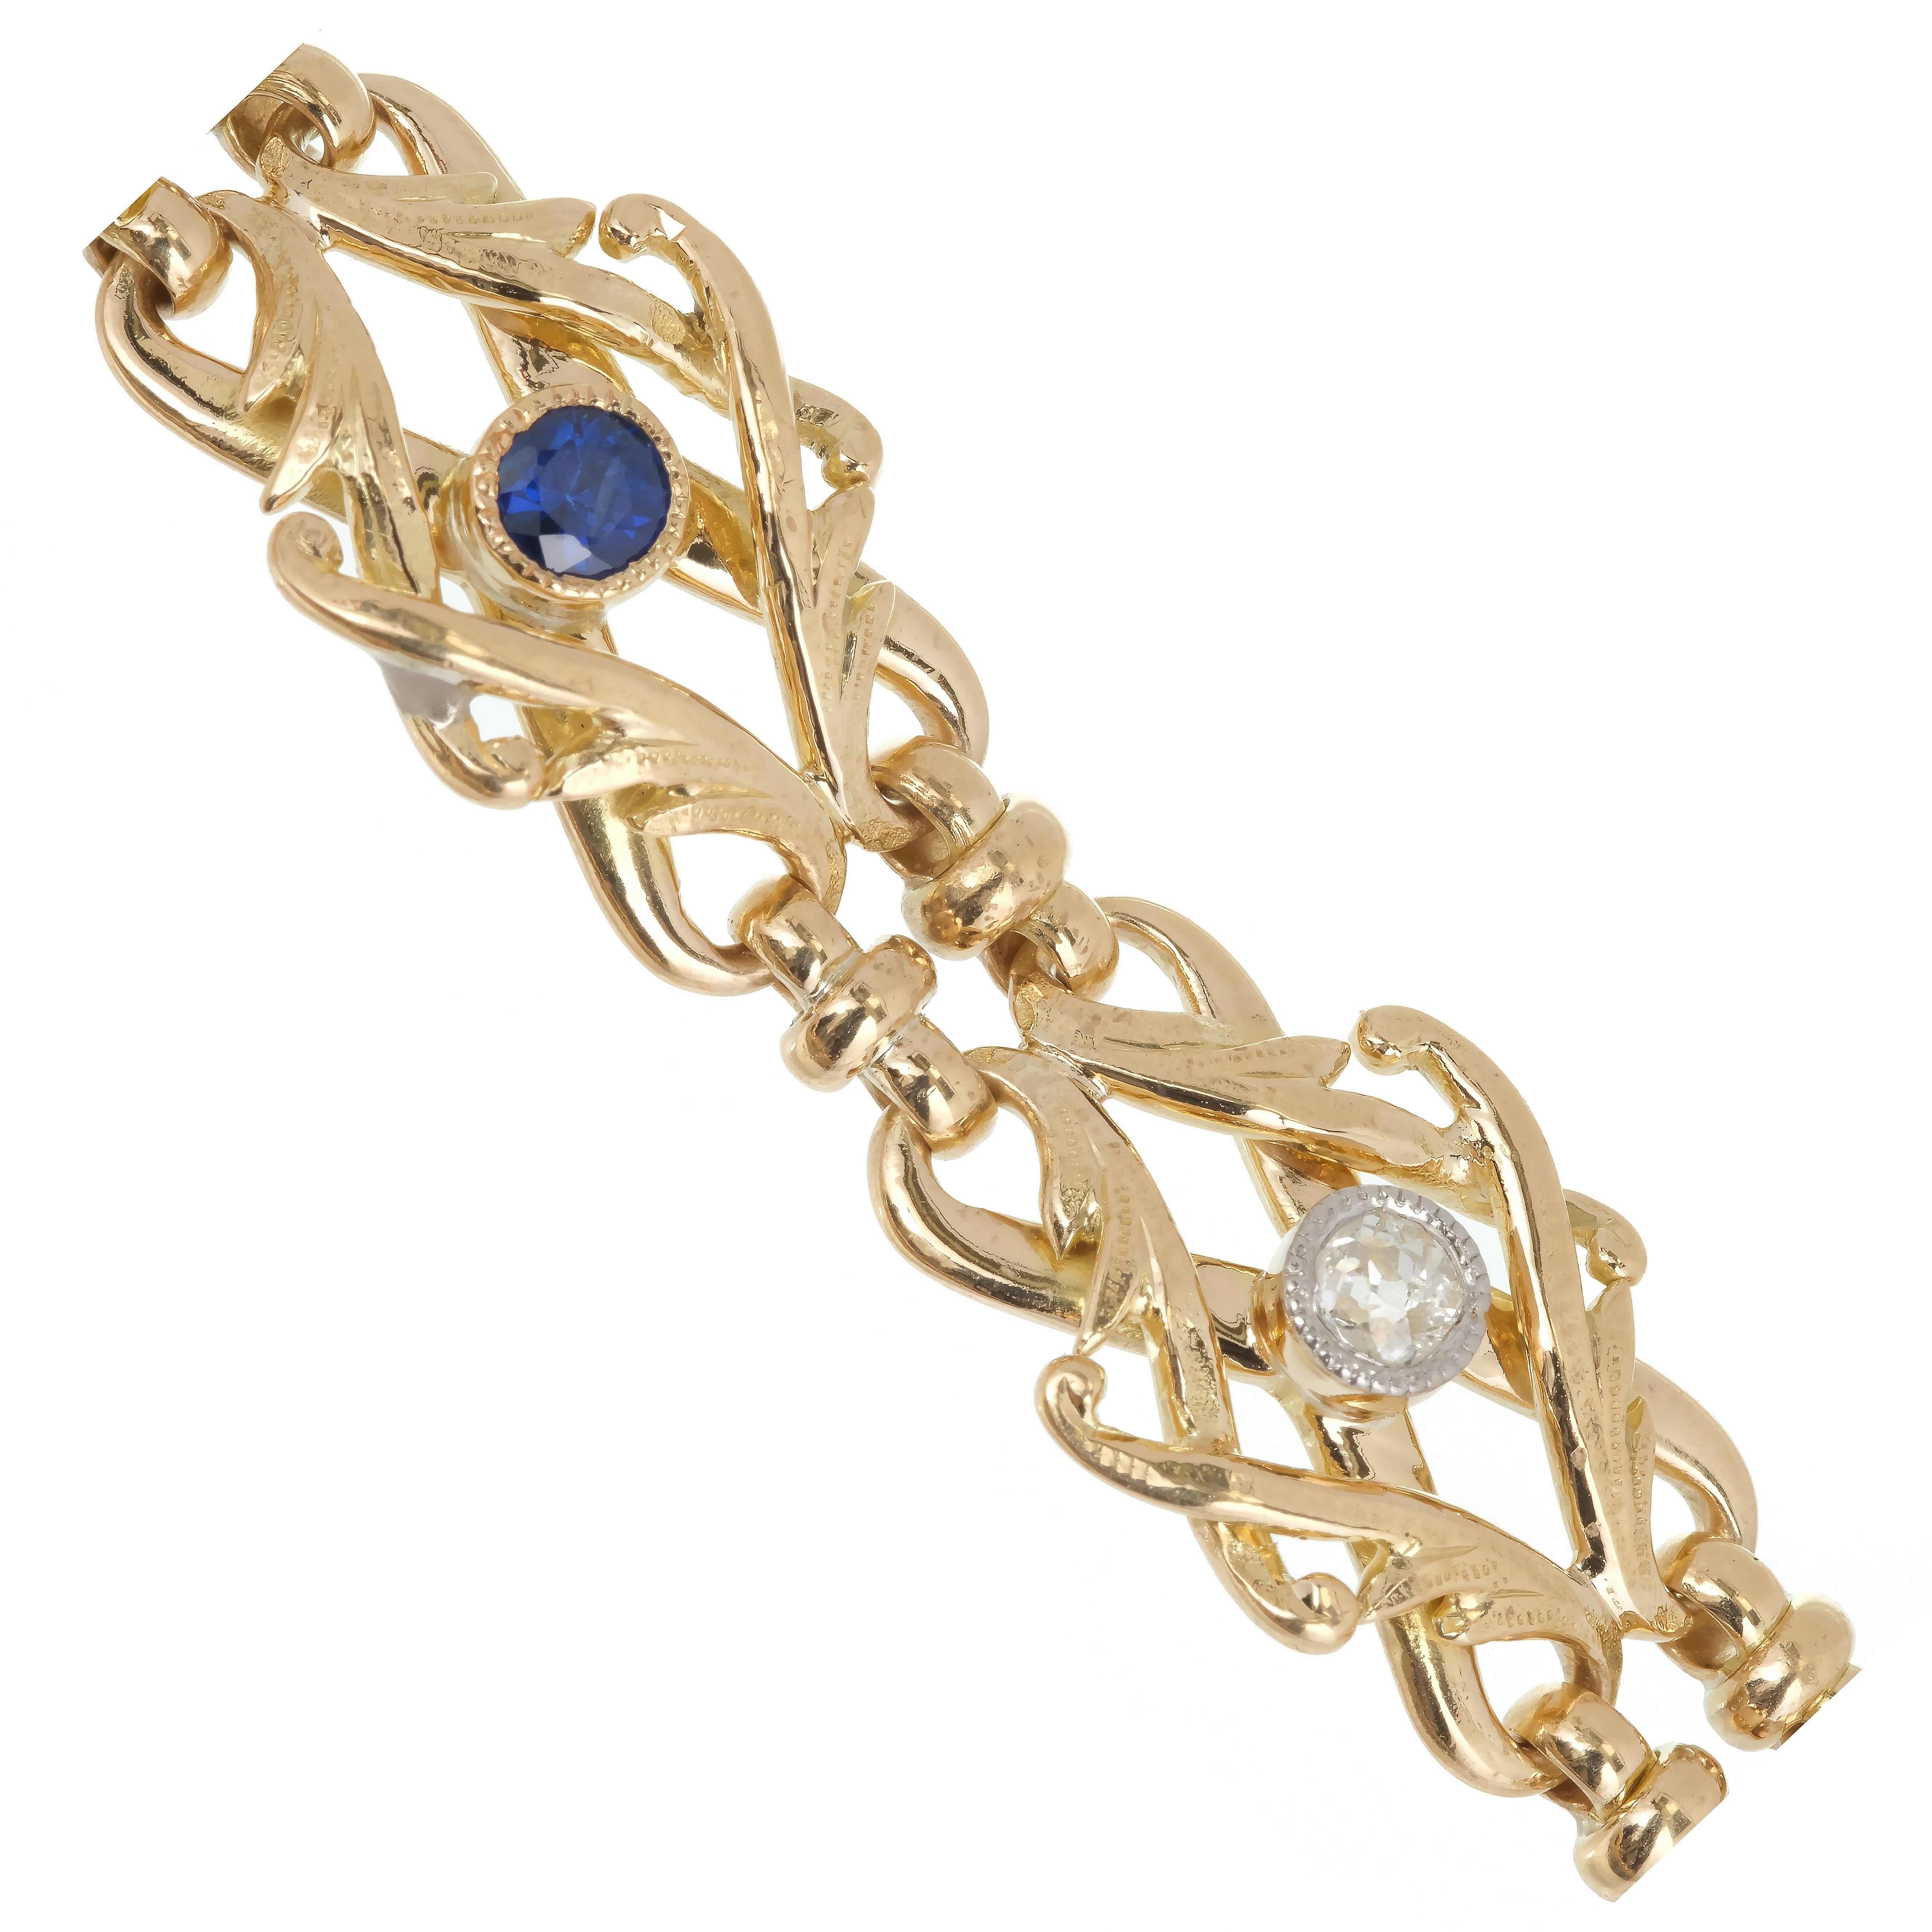 Handmade Art Nouveau early 1900’s 18k yellow gold link bracelet with old mine cut Diamonds and bright blue natural Sapphires GIA certified simple heat only. Hallmarks on tongue.

4 round old European cut Diamonds, approx. total weight .68cts, F – G,